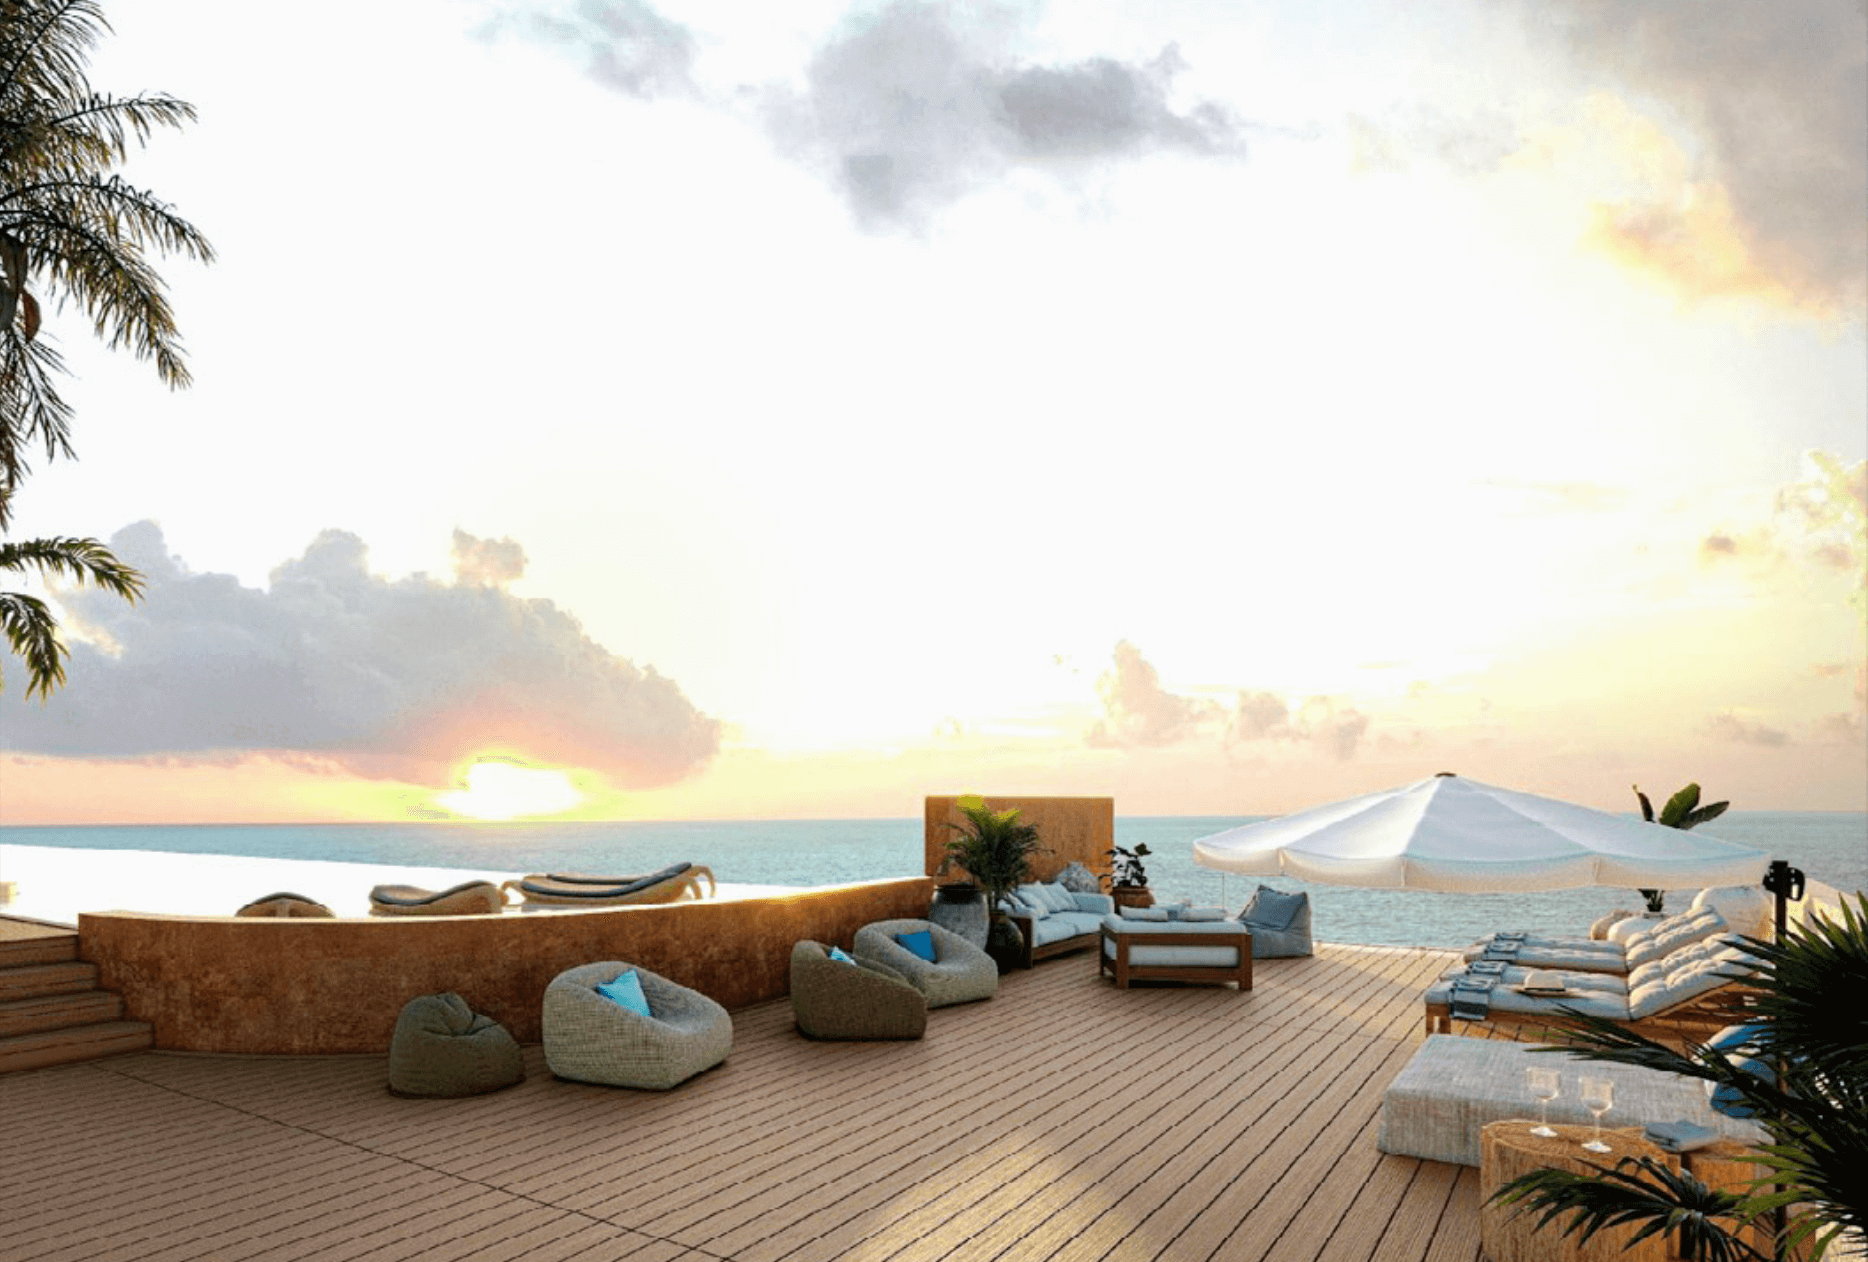 Ocean view penthouse, private terrace of 196 m2,  ocean front pool, beach access, unique design, innovative architecture, room service, kids